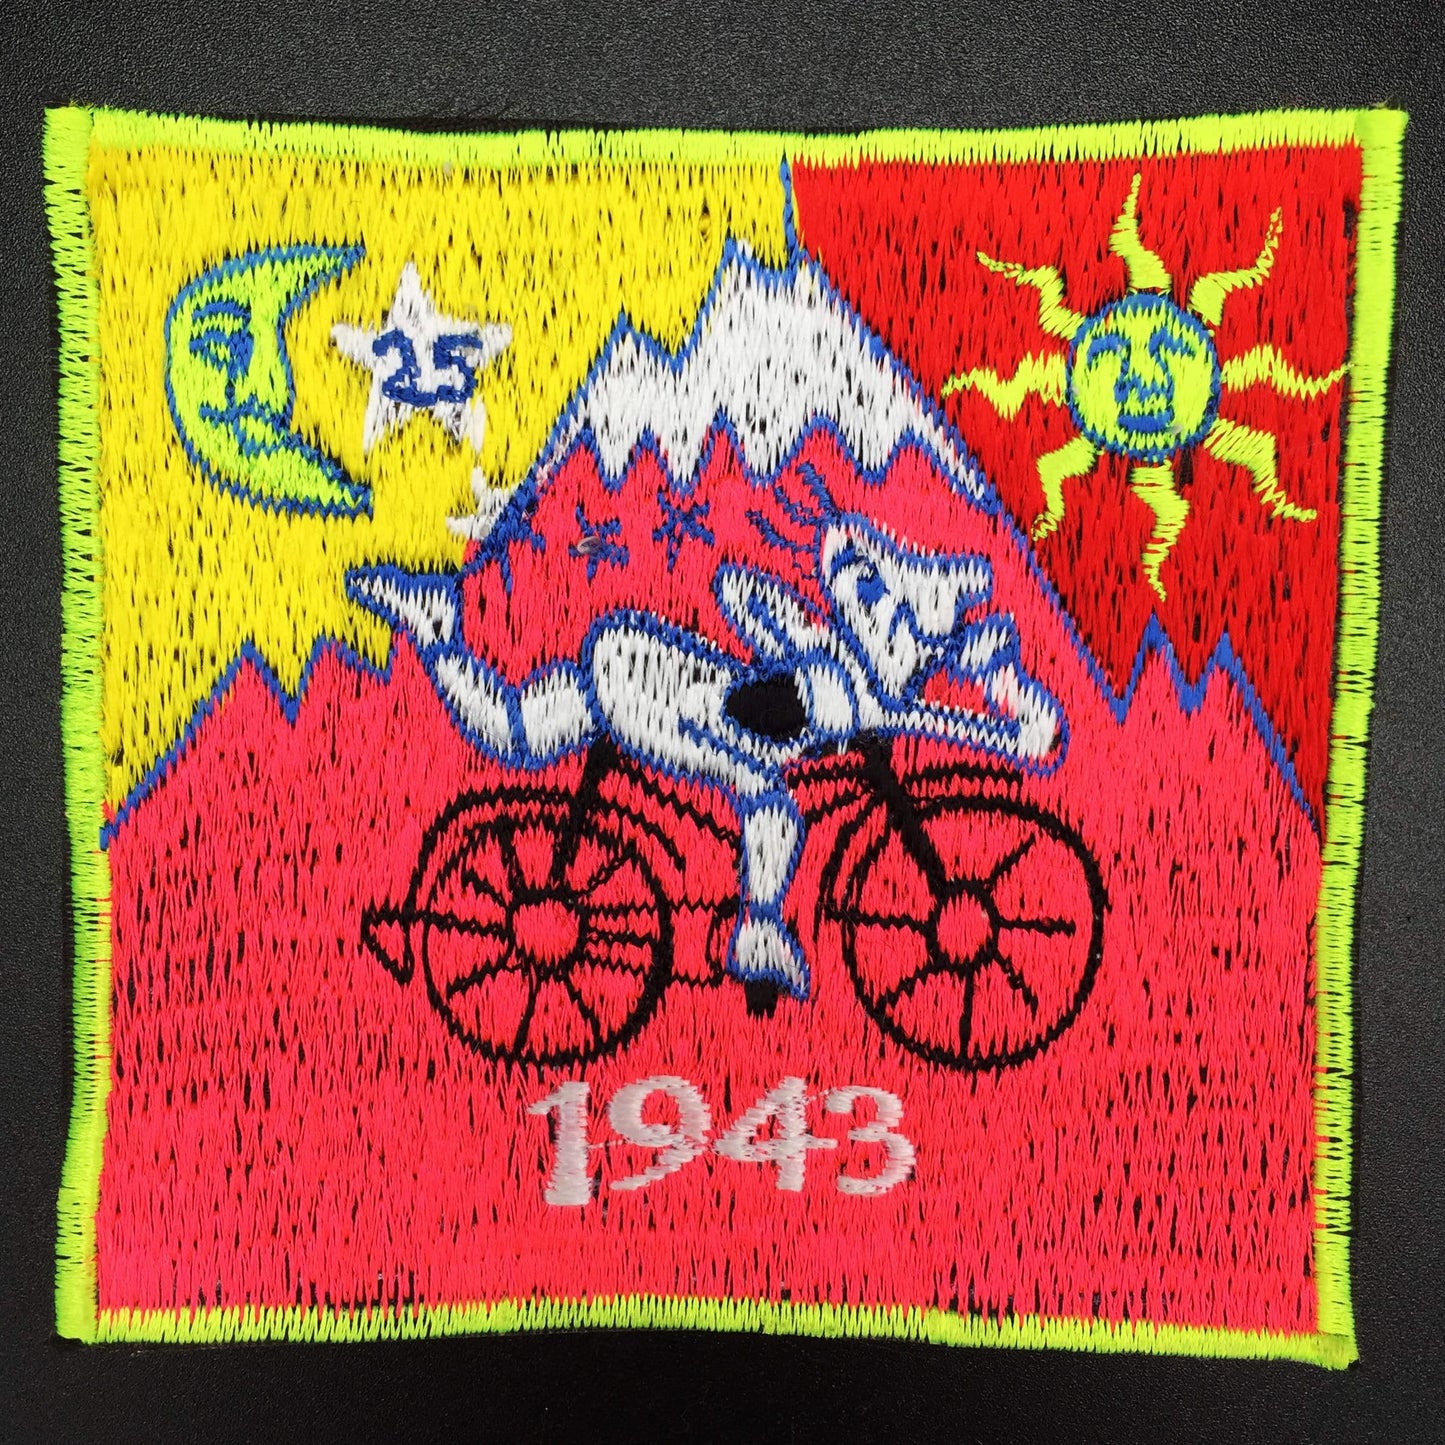 Bicycle Day Patch UV pink Albert Hofmann 1943 LSD Psychedelic Hippie Leary 3.5 inch embroidery for sew on goa trance festival wear outfit